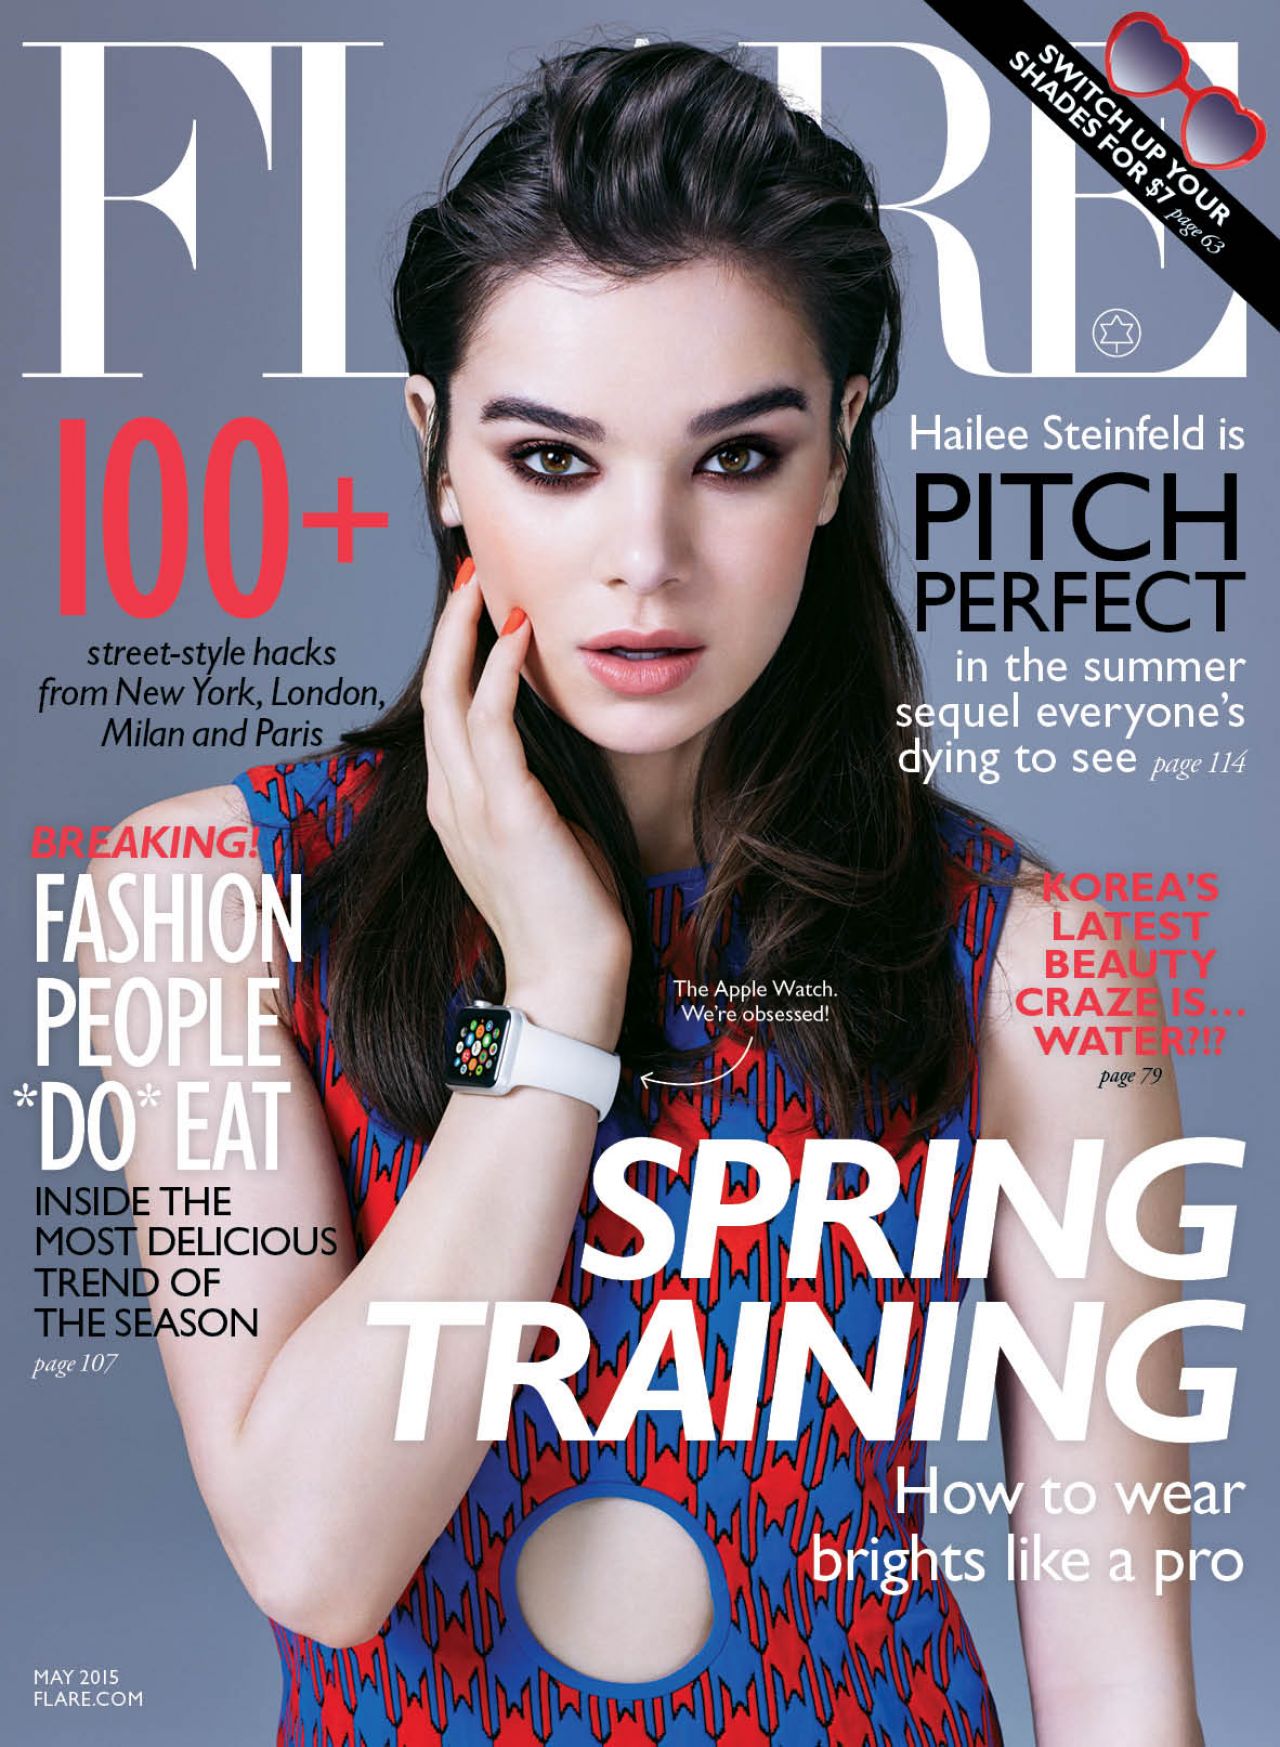 hailee-steinfeld-flare-magazine-may-2015-issue_7.